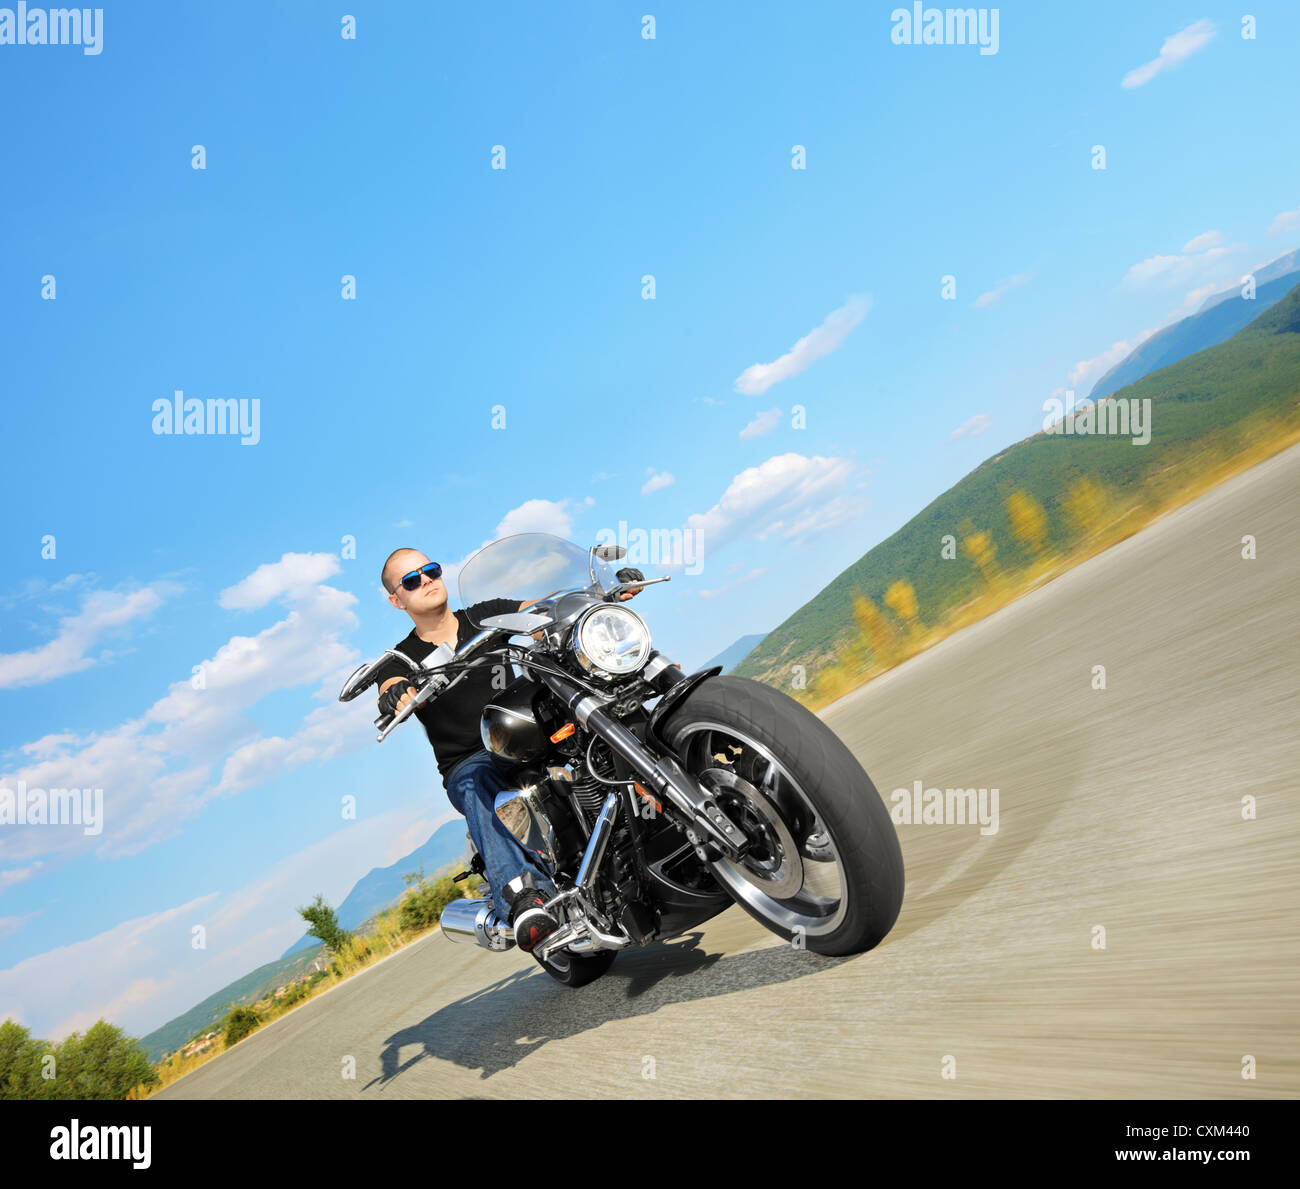 Biker riding a customized motorcycle on an open road Stock Photo